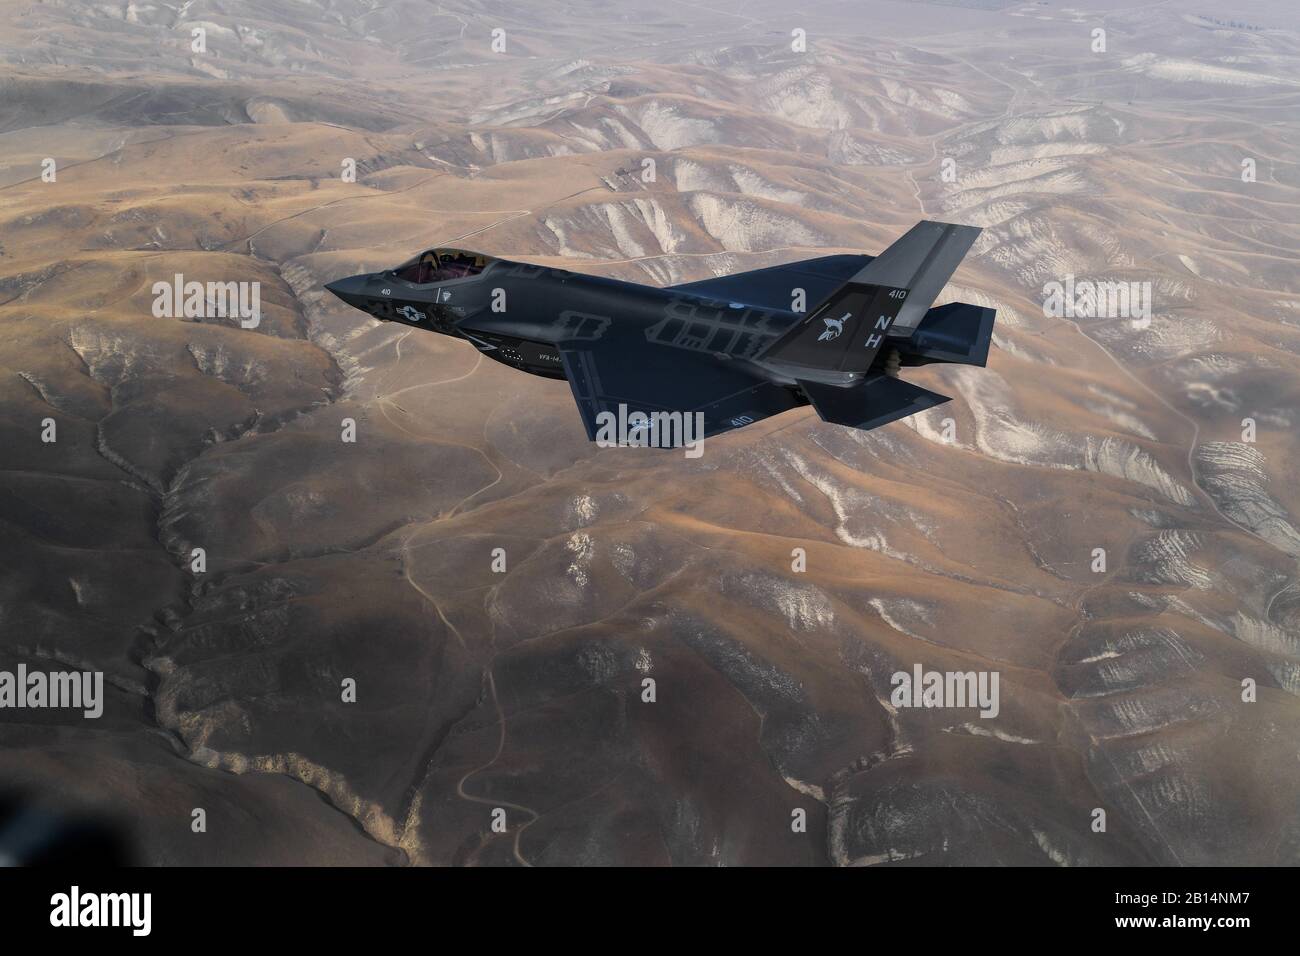 A U.S. Navy F-35C Lightning II, attached to the 'Argonauts' of Strike Fighter Squadron (VFA) 147, stationed at Naval Air Station (NAS) Lemoore, California, fly in formation for a photo exercise over California Nov. 16, 2018. VFA-147 is the first U.S. Navy Operational F-35C squadron based out of NAS Lemoore. Commander, Joint Strike Fighter Wing, NAS Lemoore, ensures that each F-35C squadron is fully combat-ready to conduct carrier-based, all-weather, attack, fighter and support missions for Commander, Naval Air Forces.  With its stealth technology, advanced sensors, weapons capacity and range, Stock Photo